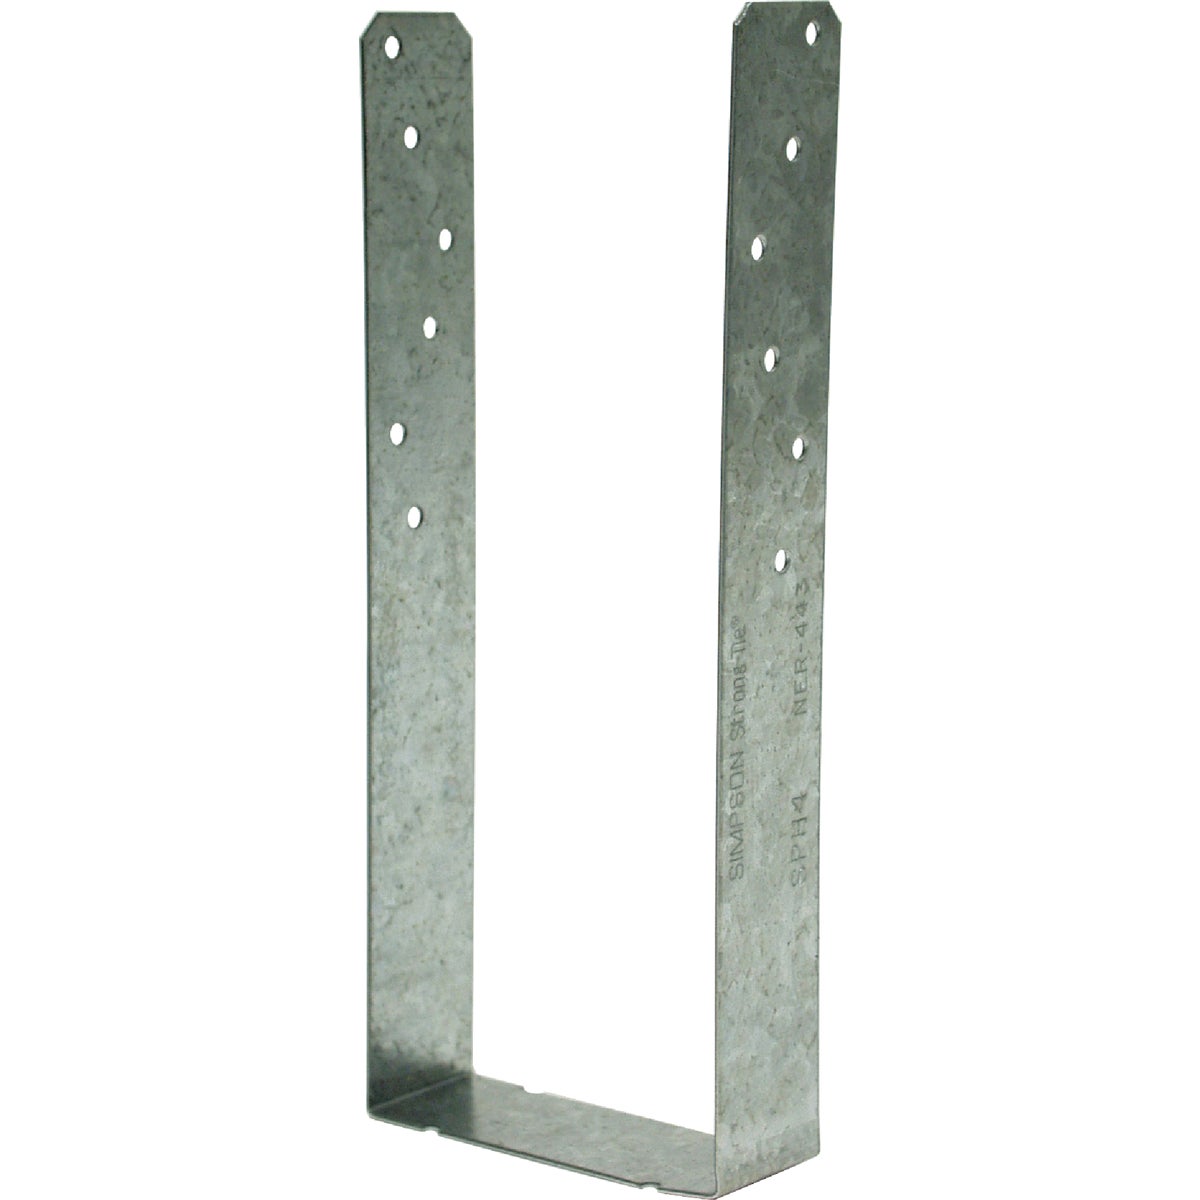 Item 107441, Offers various solutions for connecting the stud to the top and bottom 